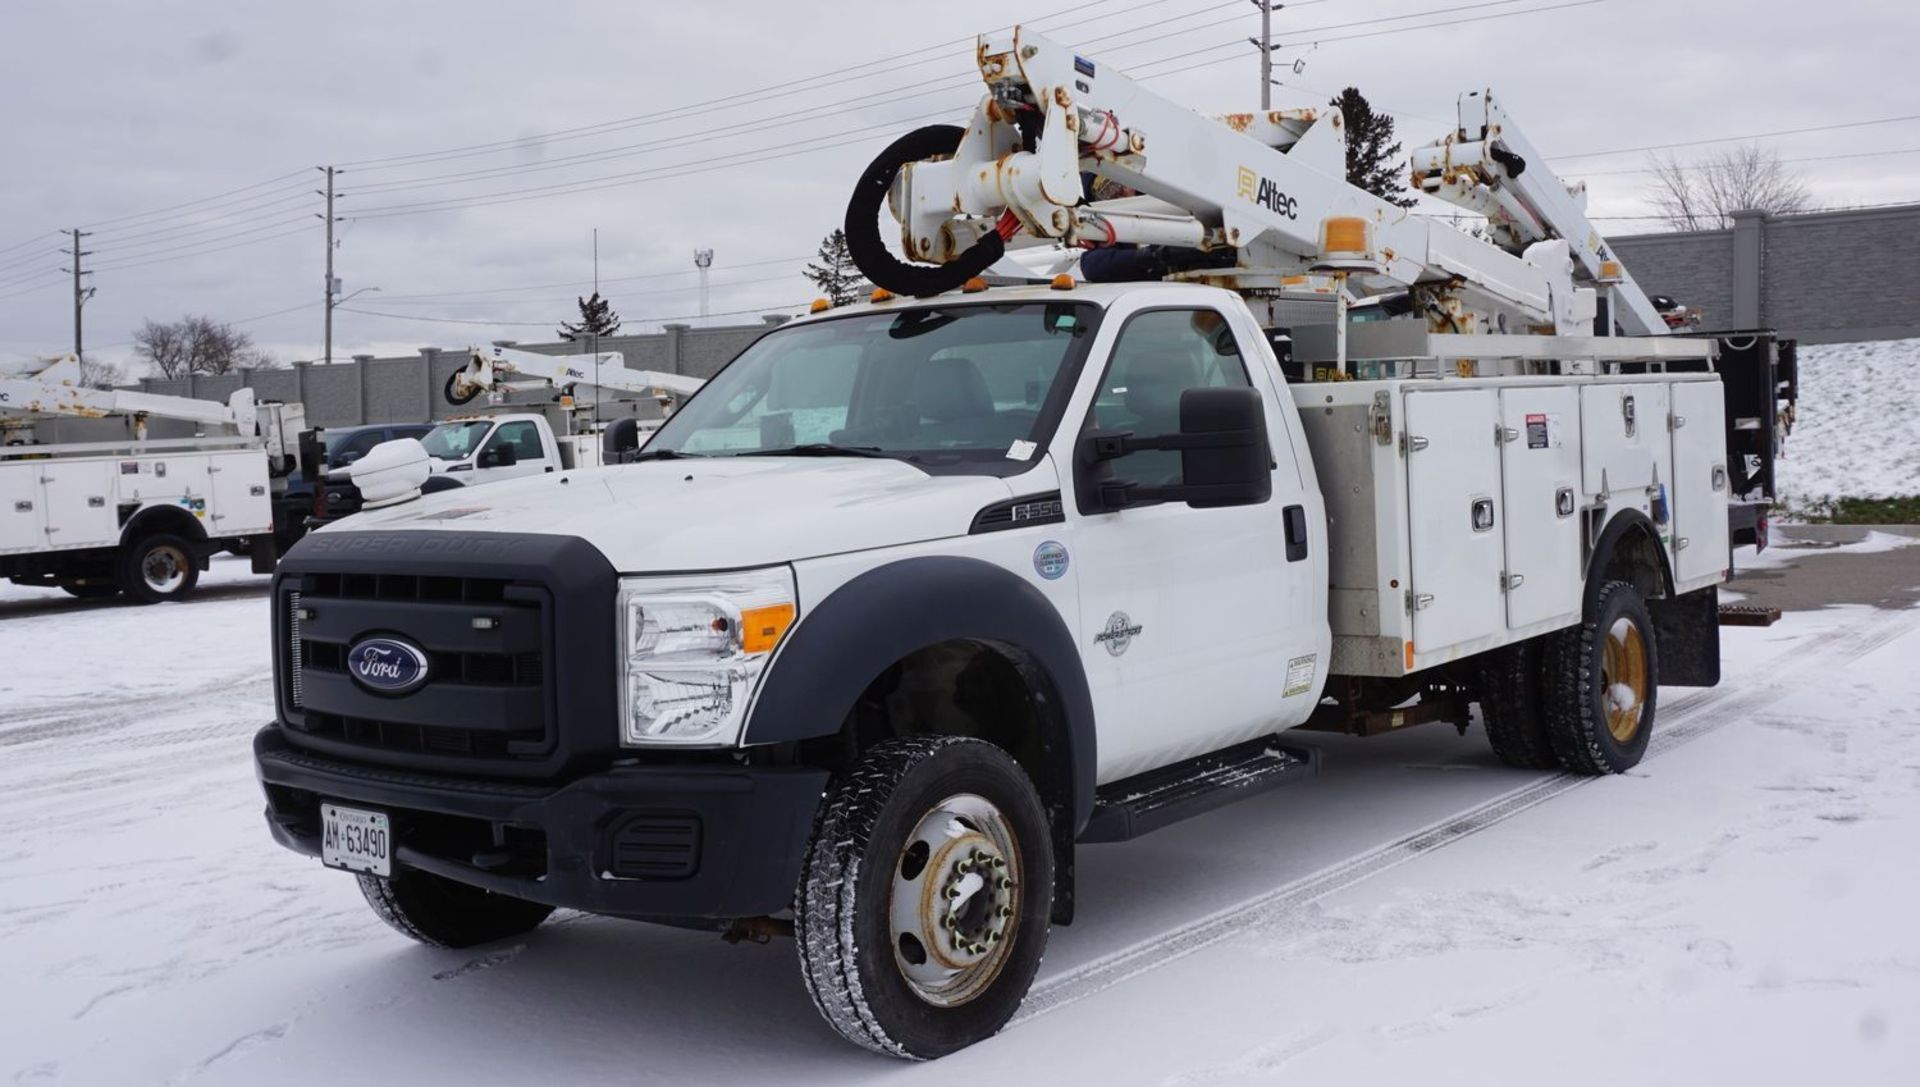 2015 ALTEC AT37G ARTICULATING TELESCOPIC BOOM & BUCKET MOUNTED ON 2015 FORD F550XL SUPER DUTY 4X4 - Image 2 of 18